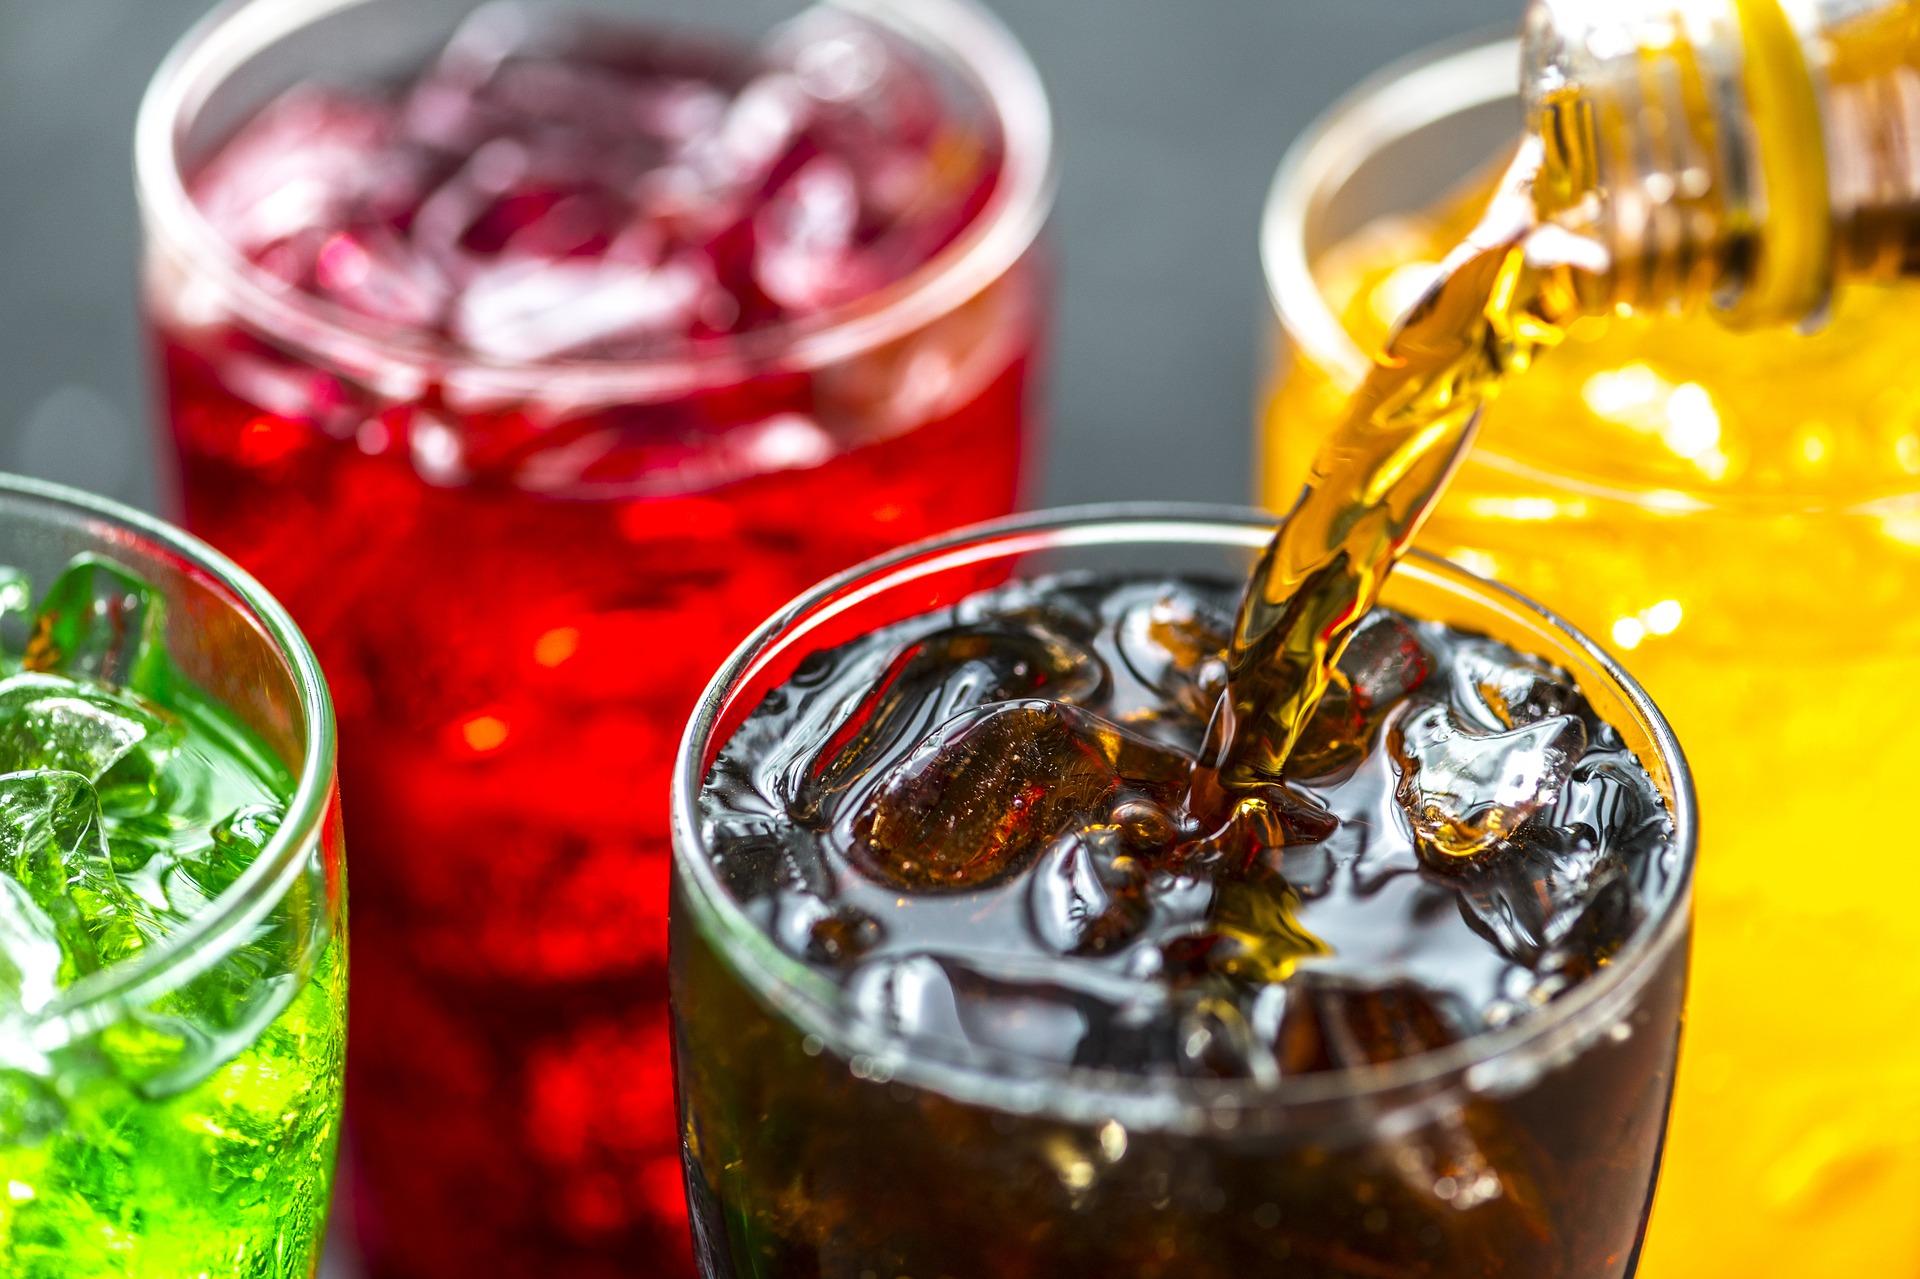 cola iced tea and soft drinks sugary drinks lead to shorter life